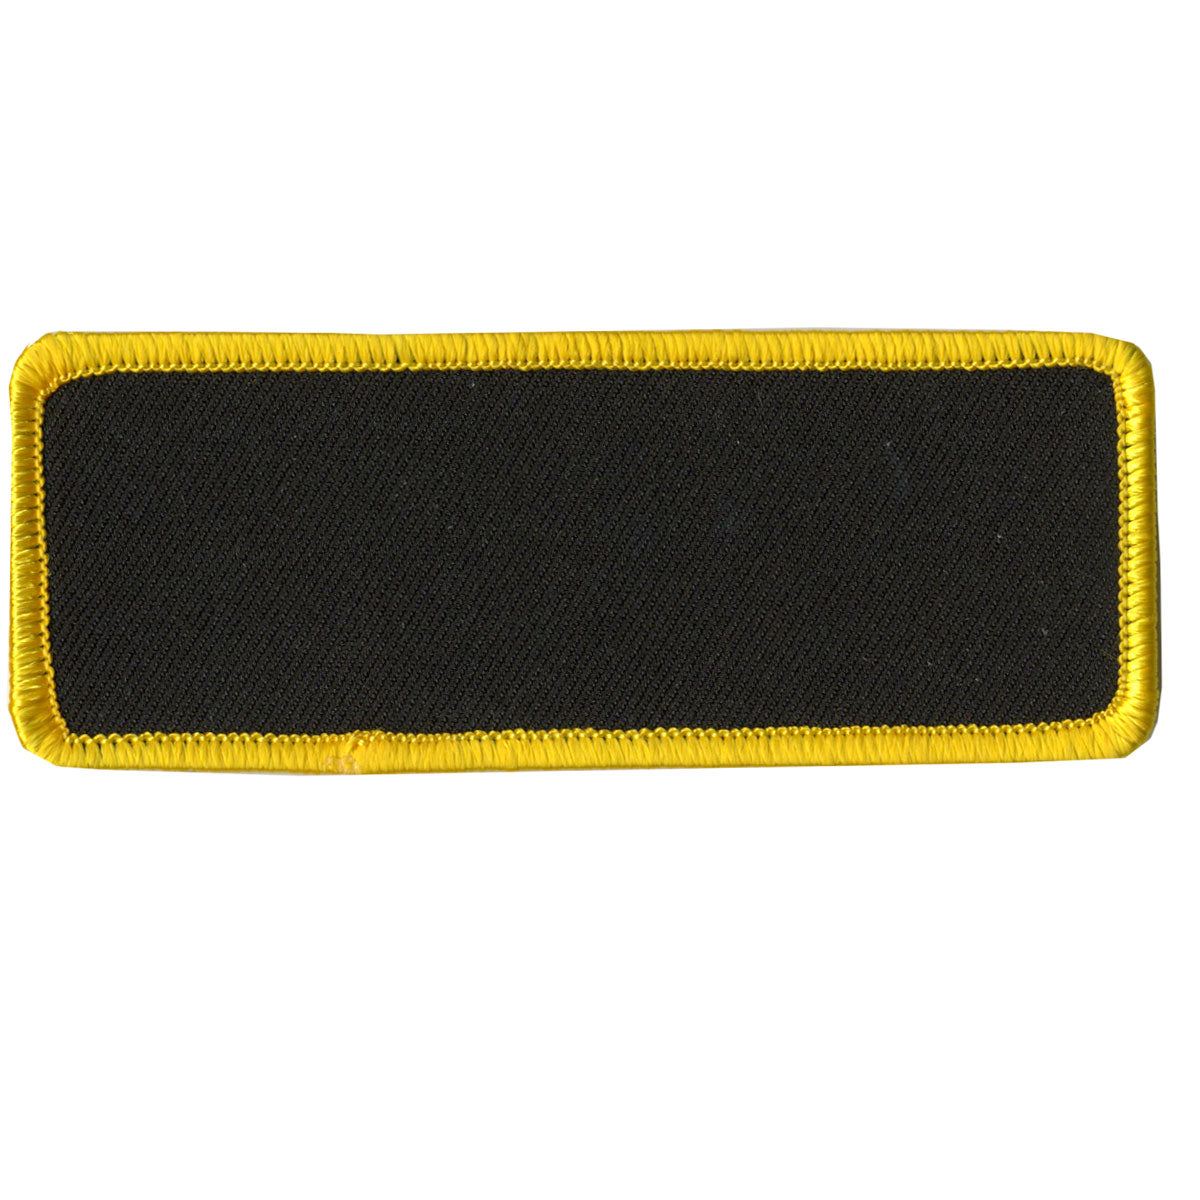 Hot Leathers PPP1009 Blank with Yellow Trim 4" x 1.5" Patch